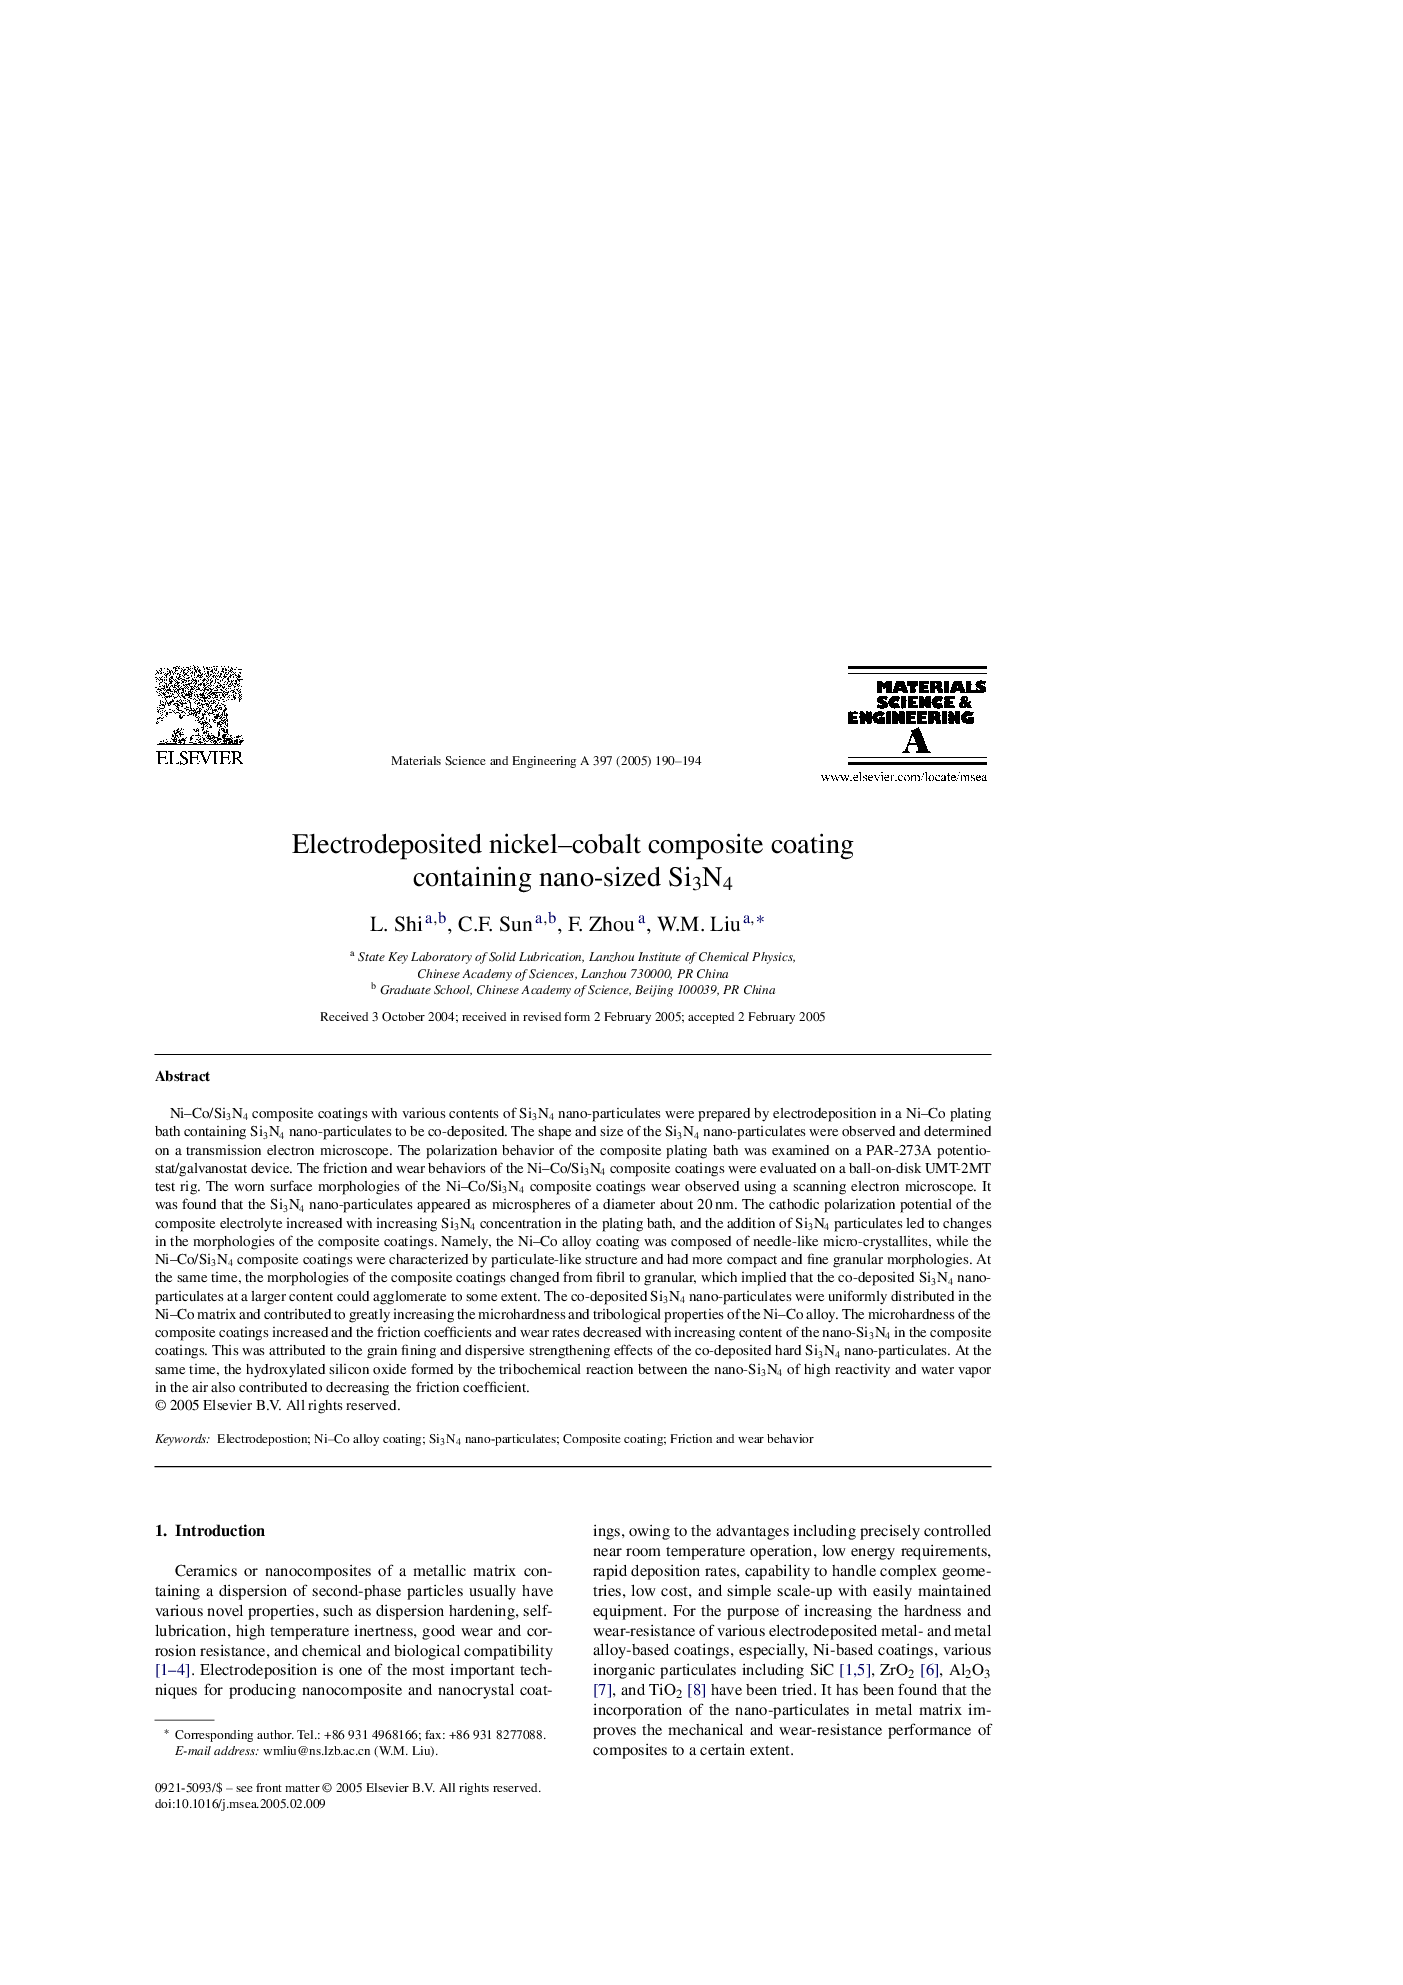 Electrodeposited nickel-cobalt composite coating containing nano-sized Si3N4